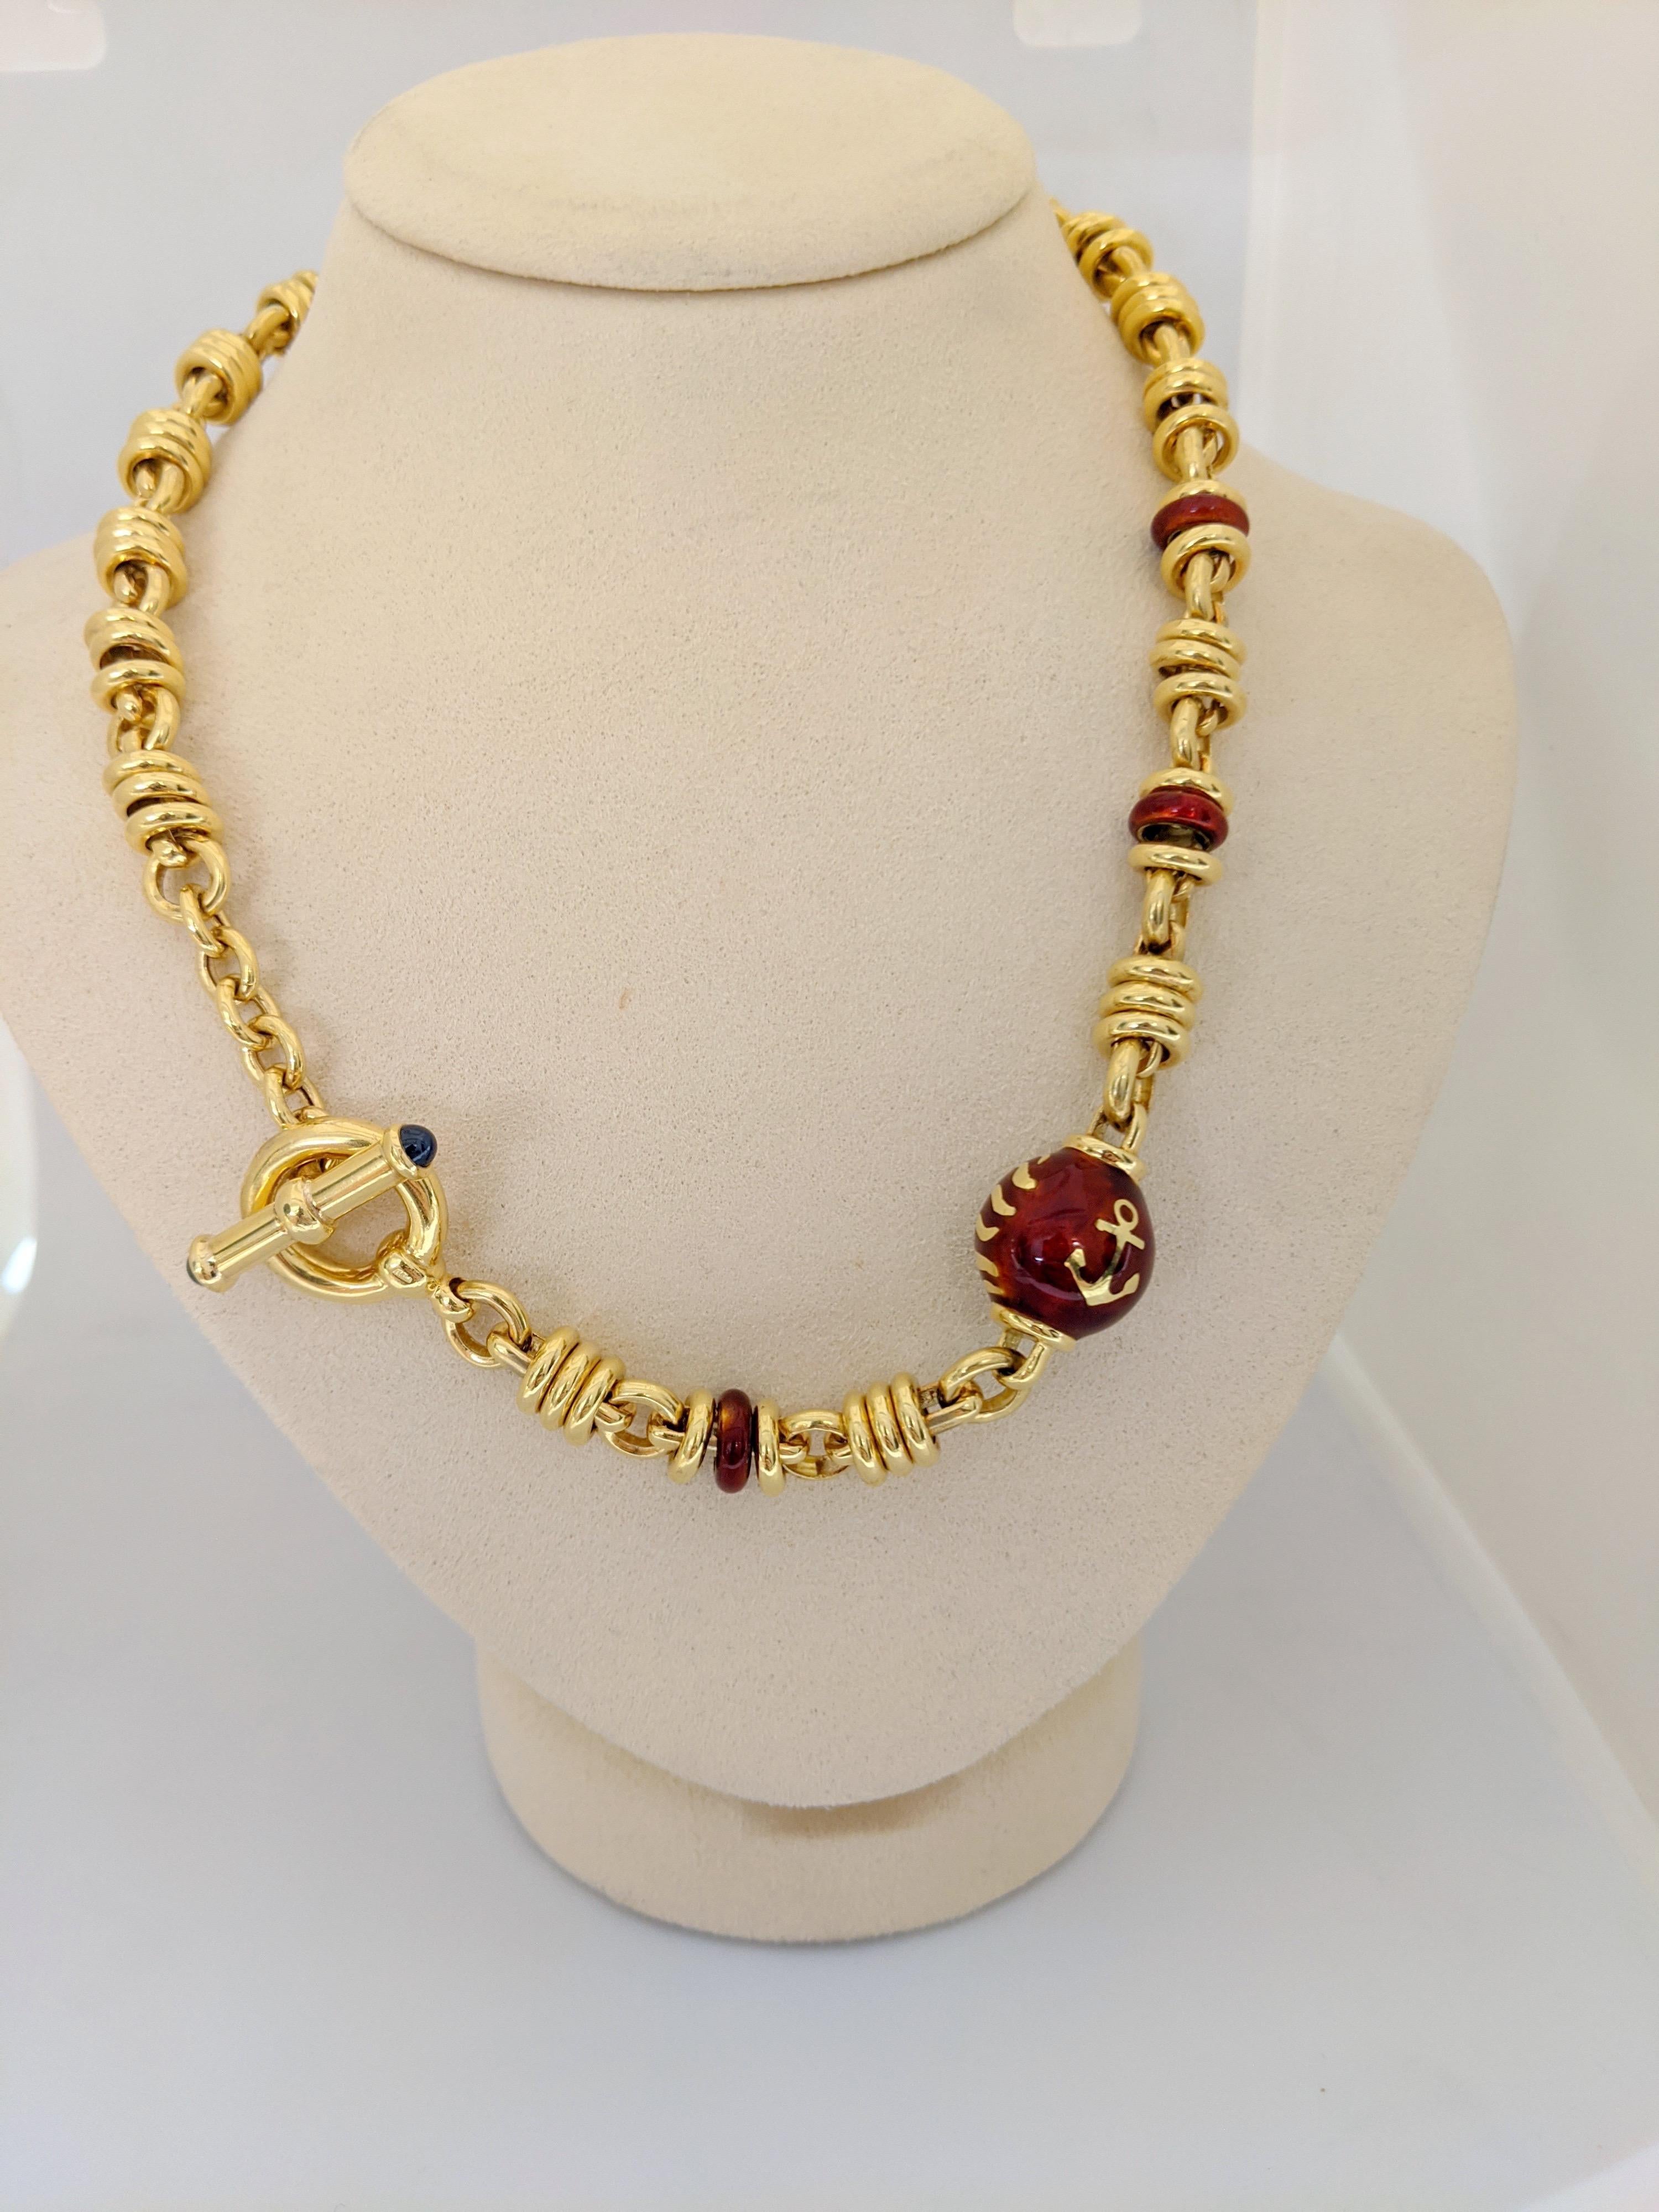 Designed by La Nouvelle Bague from Italy.  This 18 karat yellow gold link necklace features a burgundy enamel ball and a few enamel rondelles. The necklace has a toggle closure that is accented with Blue Sapphire cabachons. The necklace measures